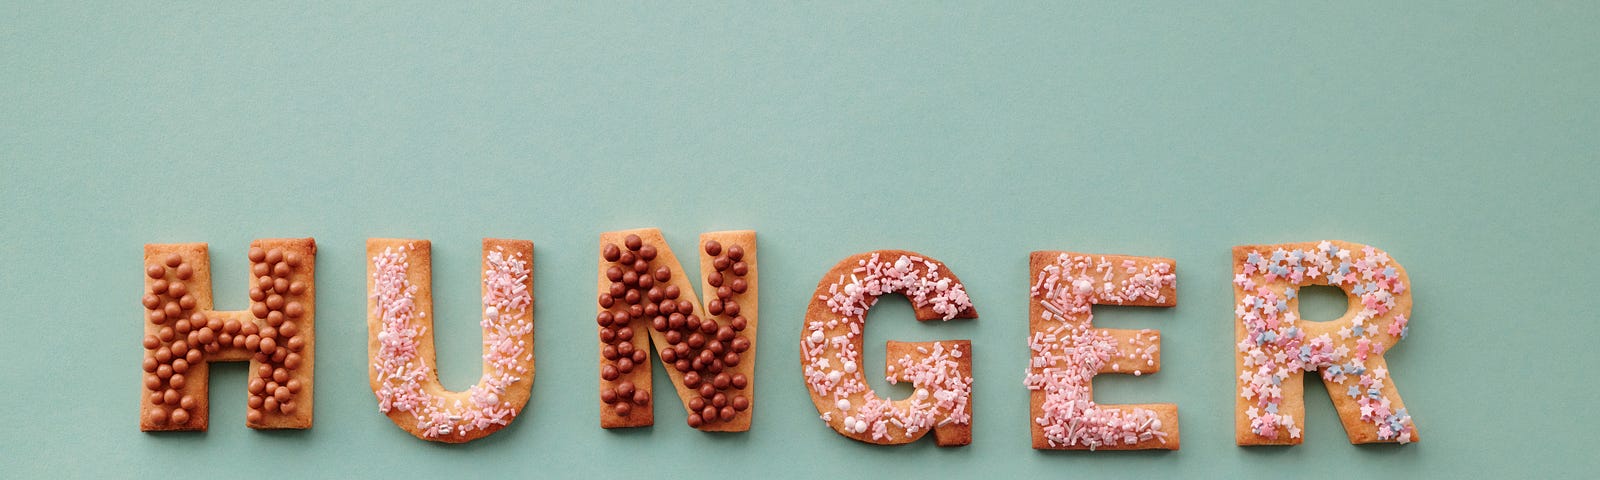 Cookies that are cut into letters and arranged to spell the word “HUNGER”